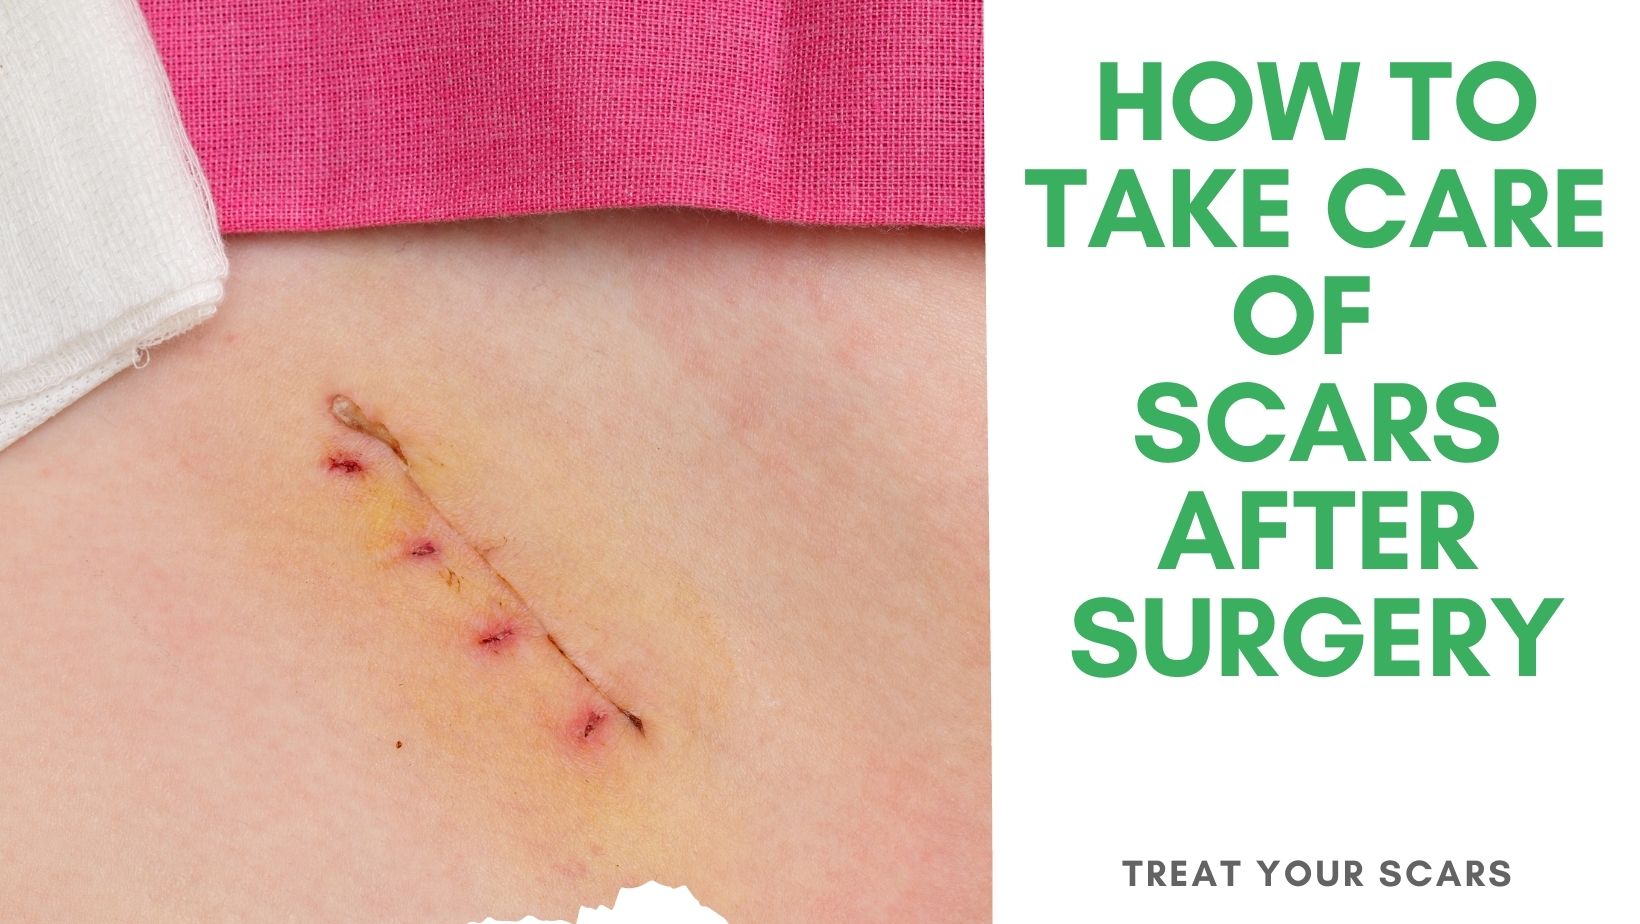 How To Take Care Of Scars After Surgery - Treat Your Scars